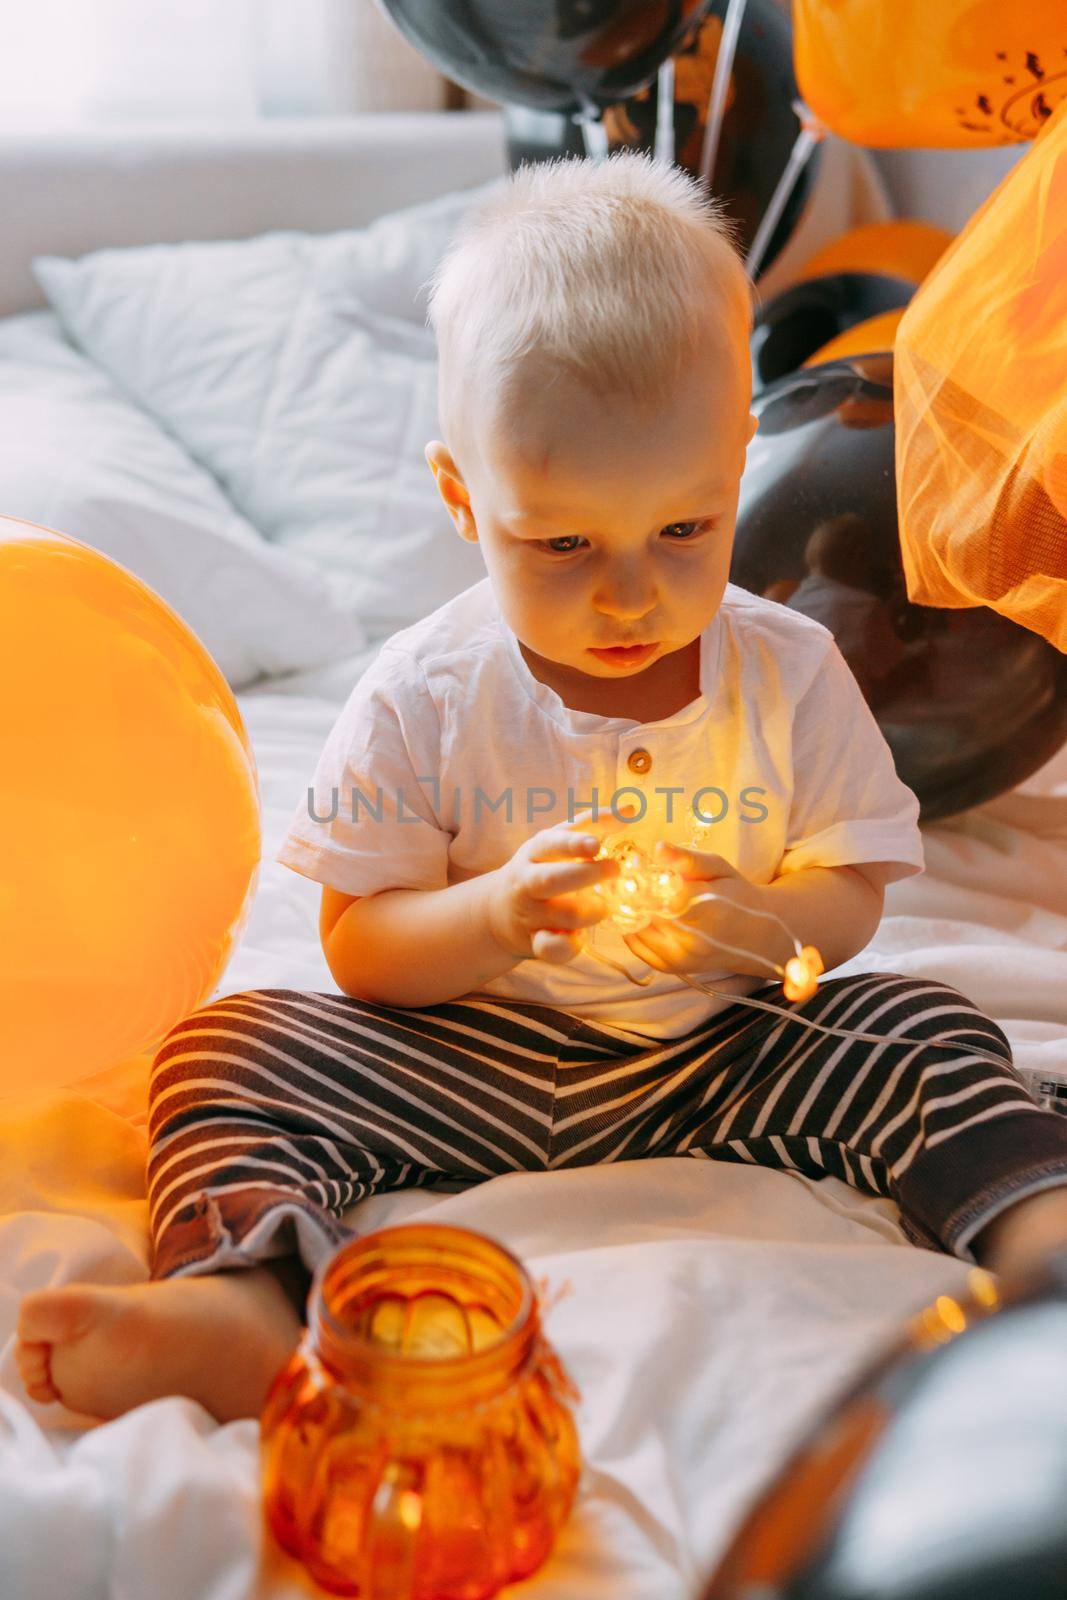 Children's Halloween - a boy in a carnival costume with orange and black balloons at home. Ready to celebrate Halloween by Annu1tochka